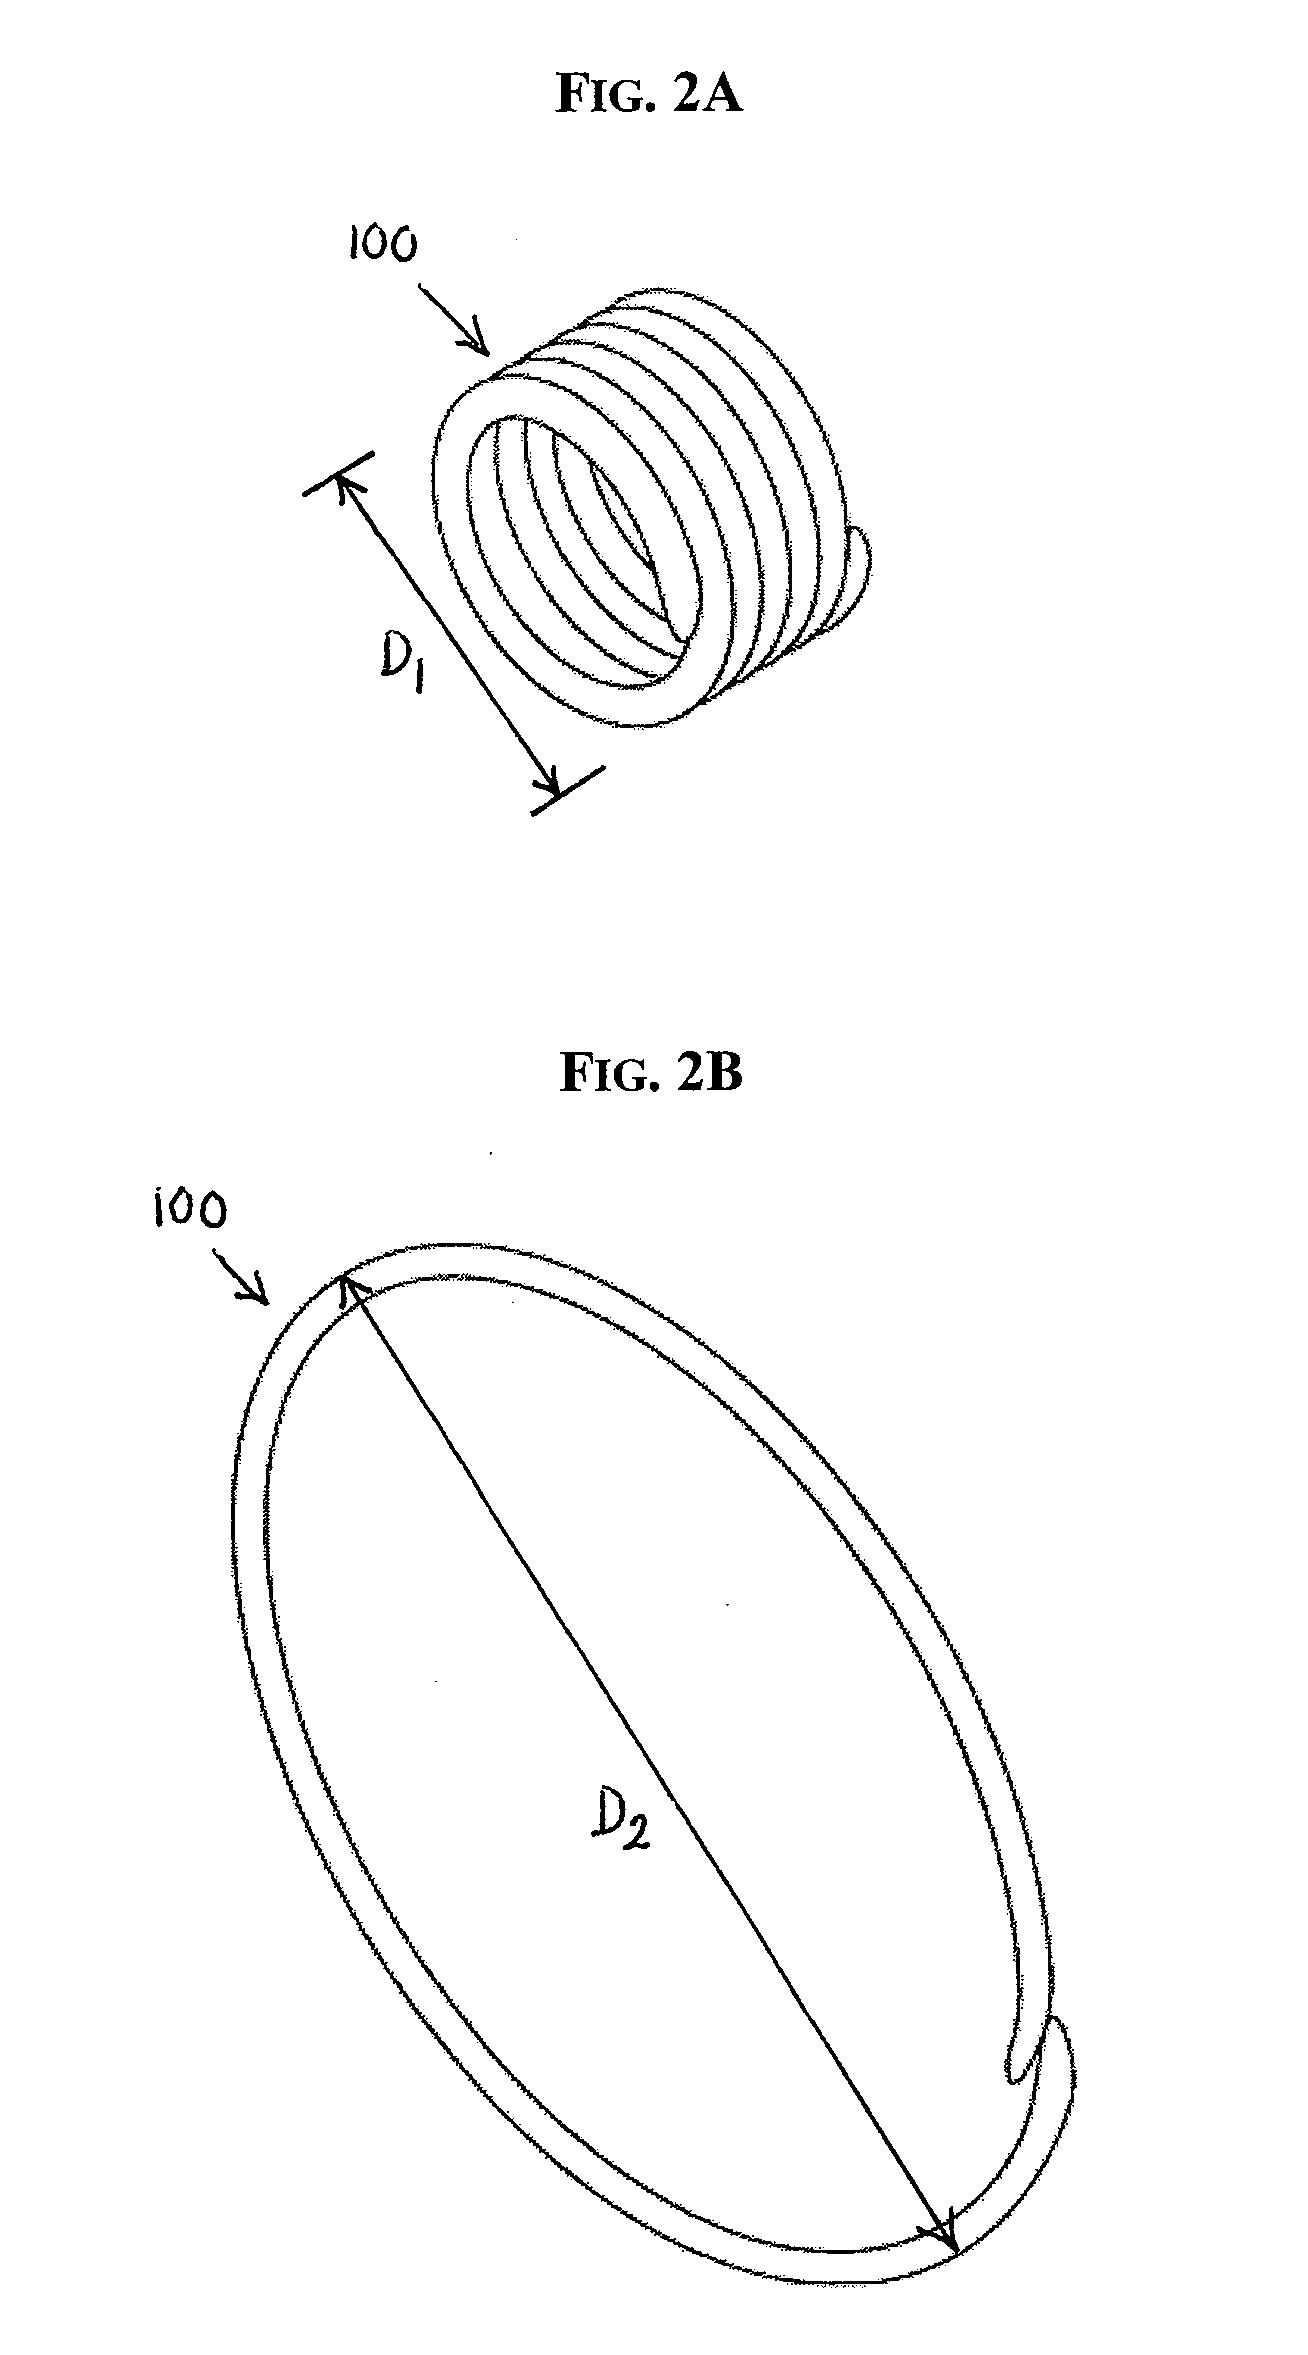 Flexible cannula devices and methods